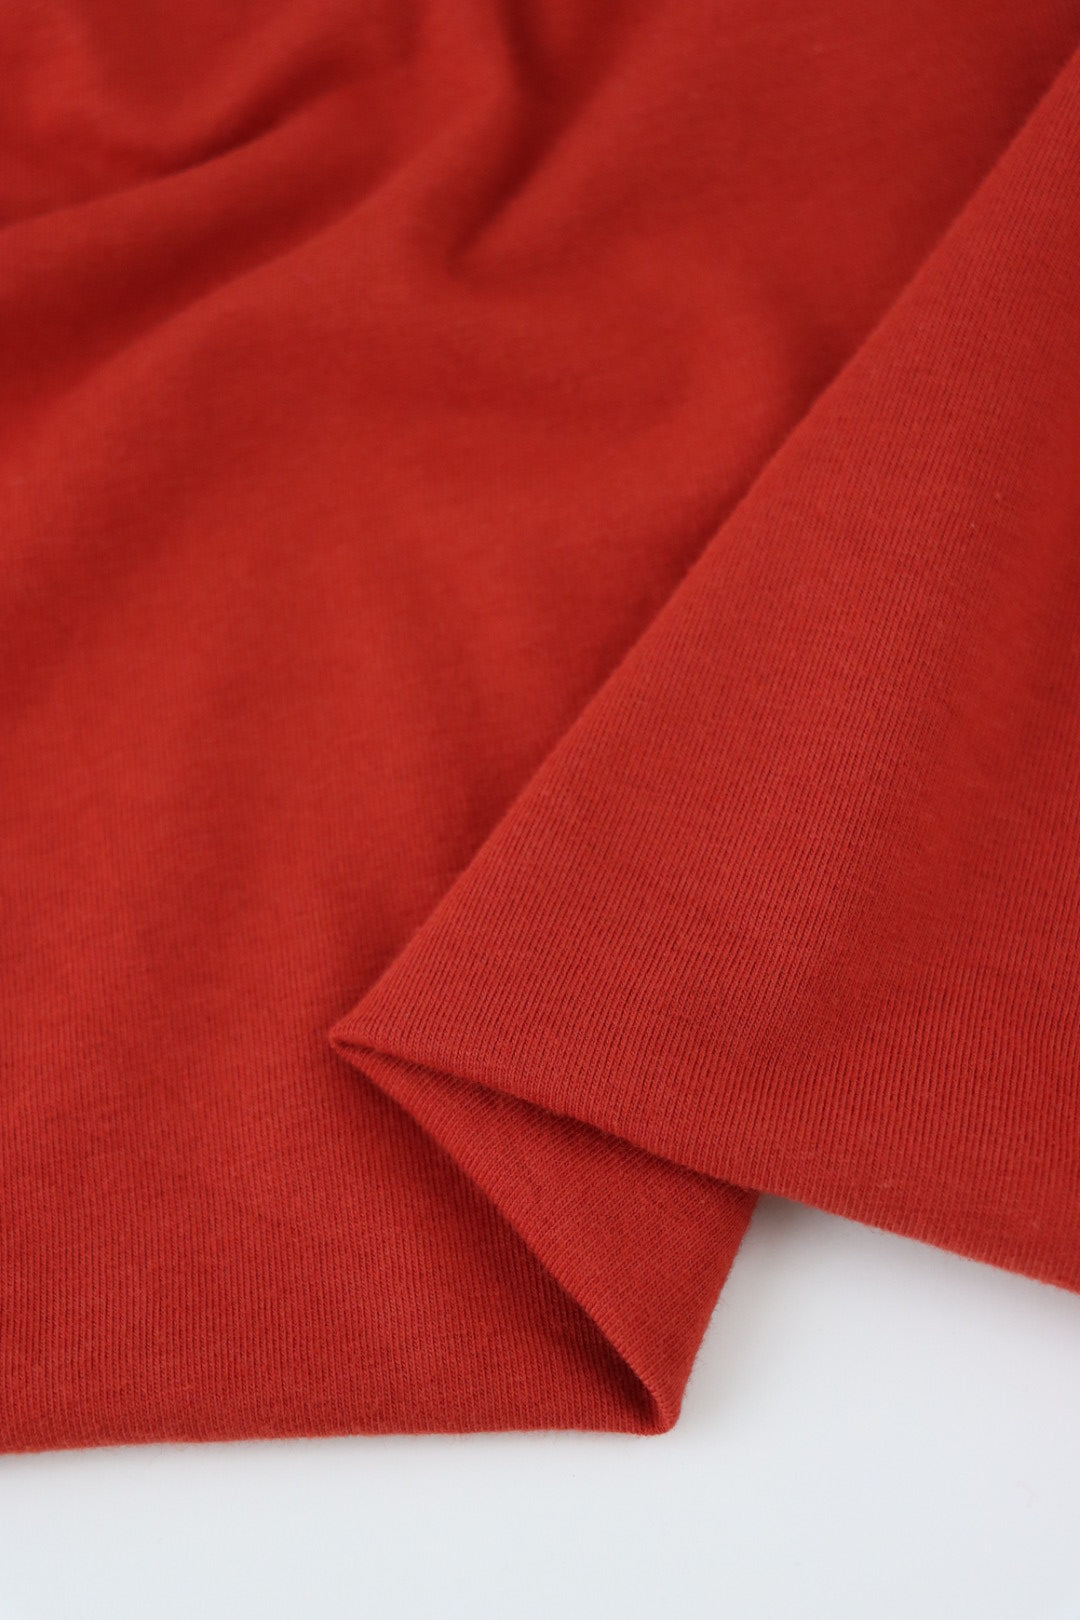 Red Cotton Spandex Jersey Fabric - Fabric by the Yard